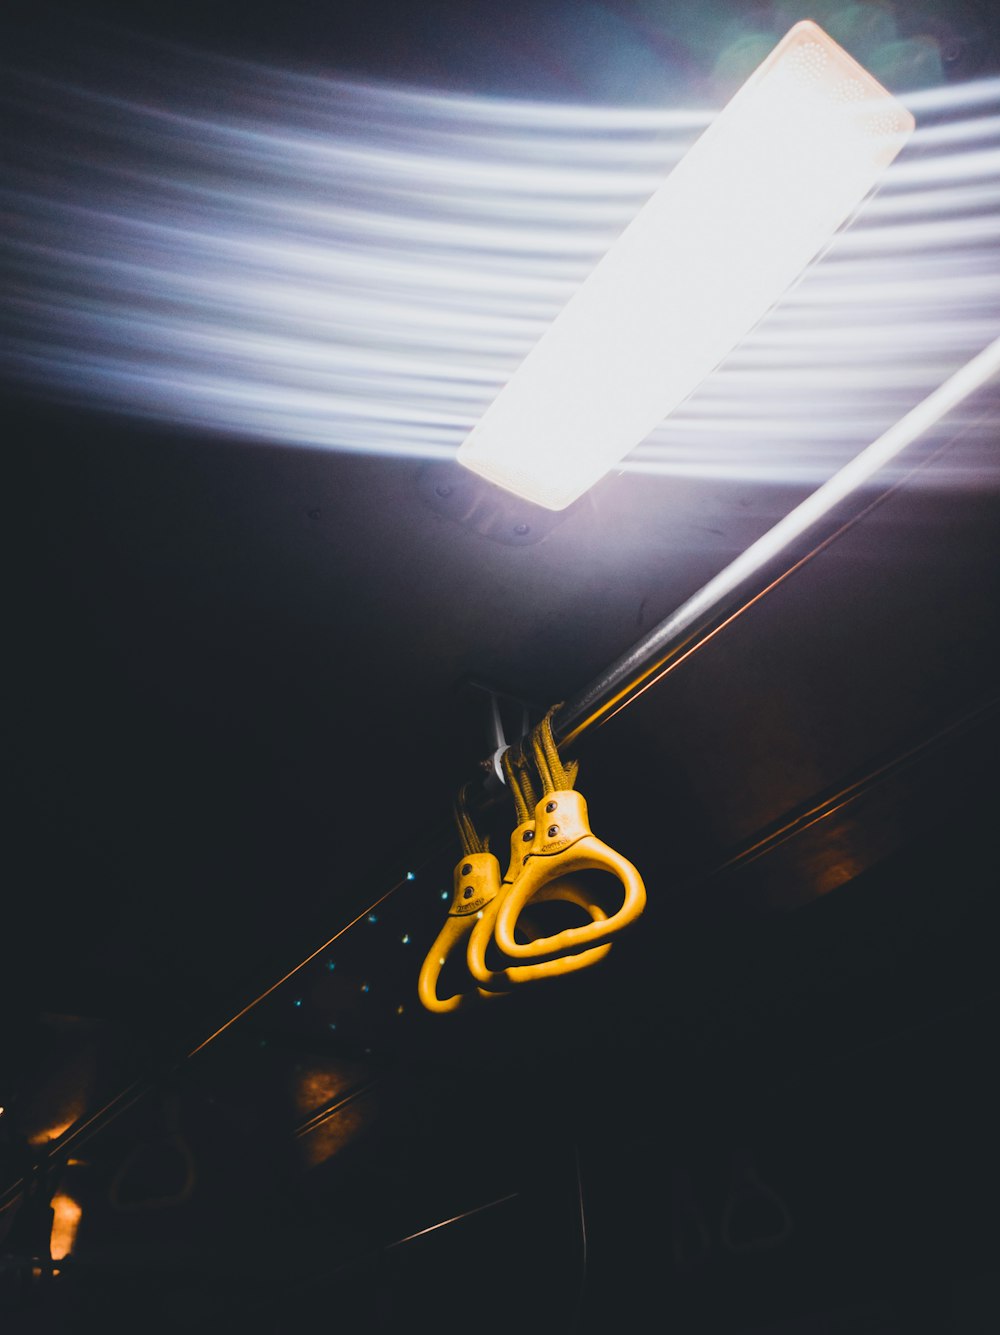 a yellow object hanging from a ceiling in a dark room